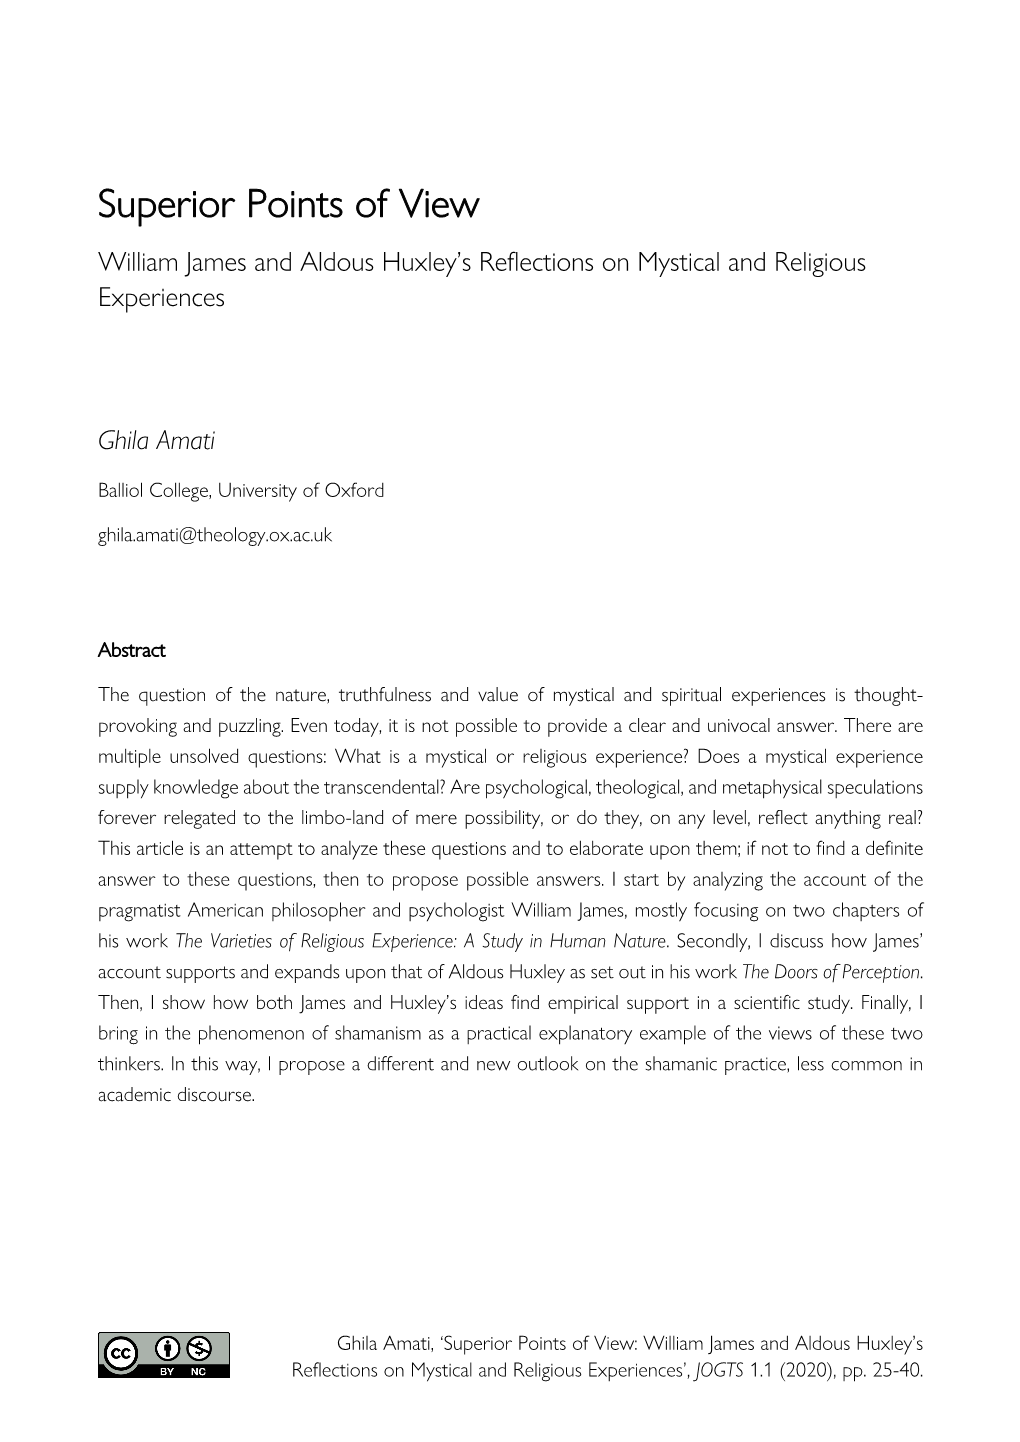 Superior Points of View William James and Aldous Huxley’S Reflections on Mystical and Religious Experiences